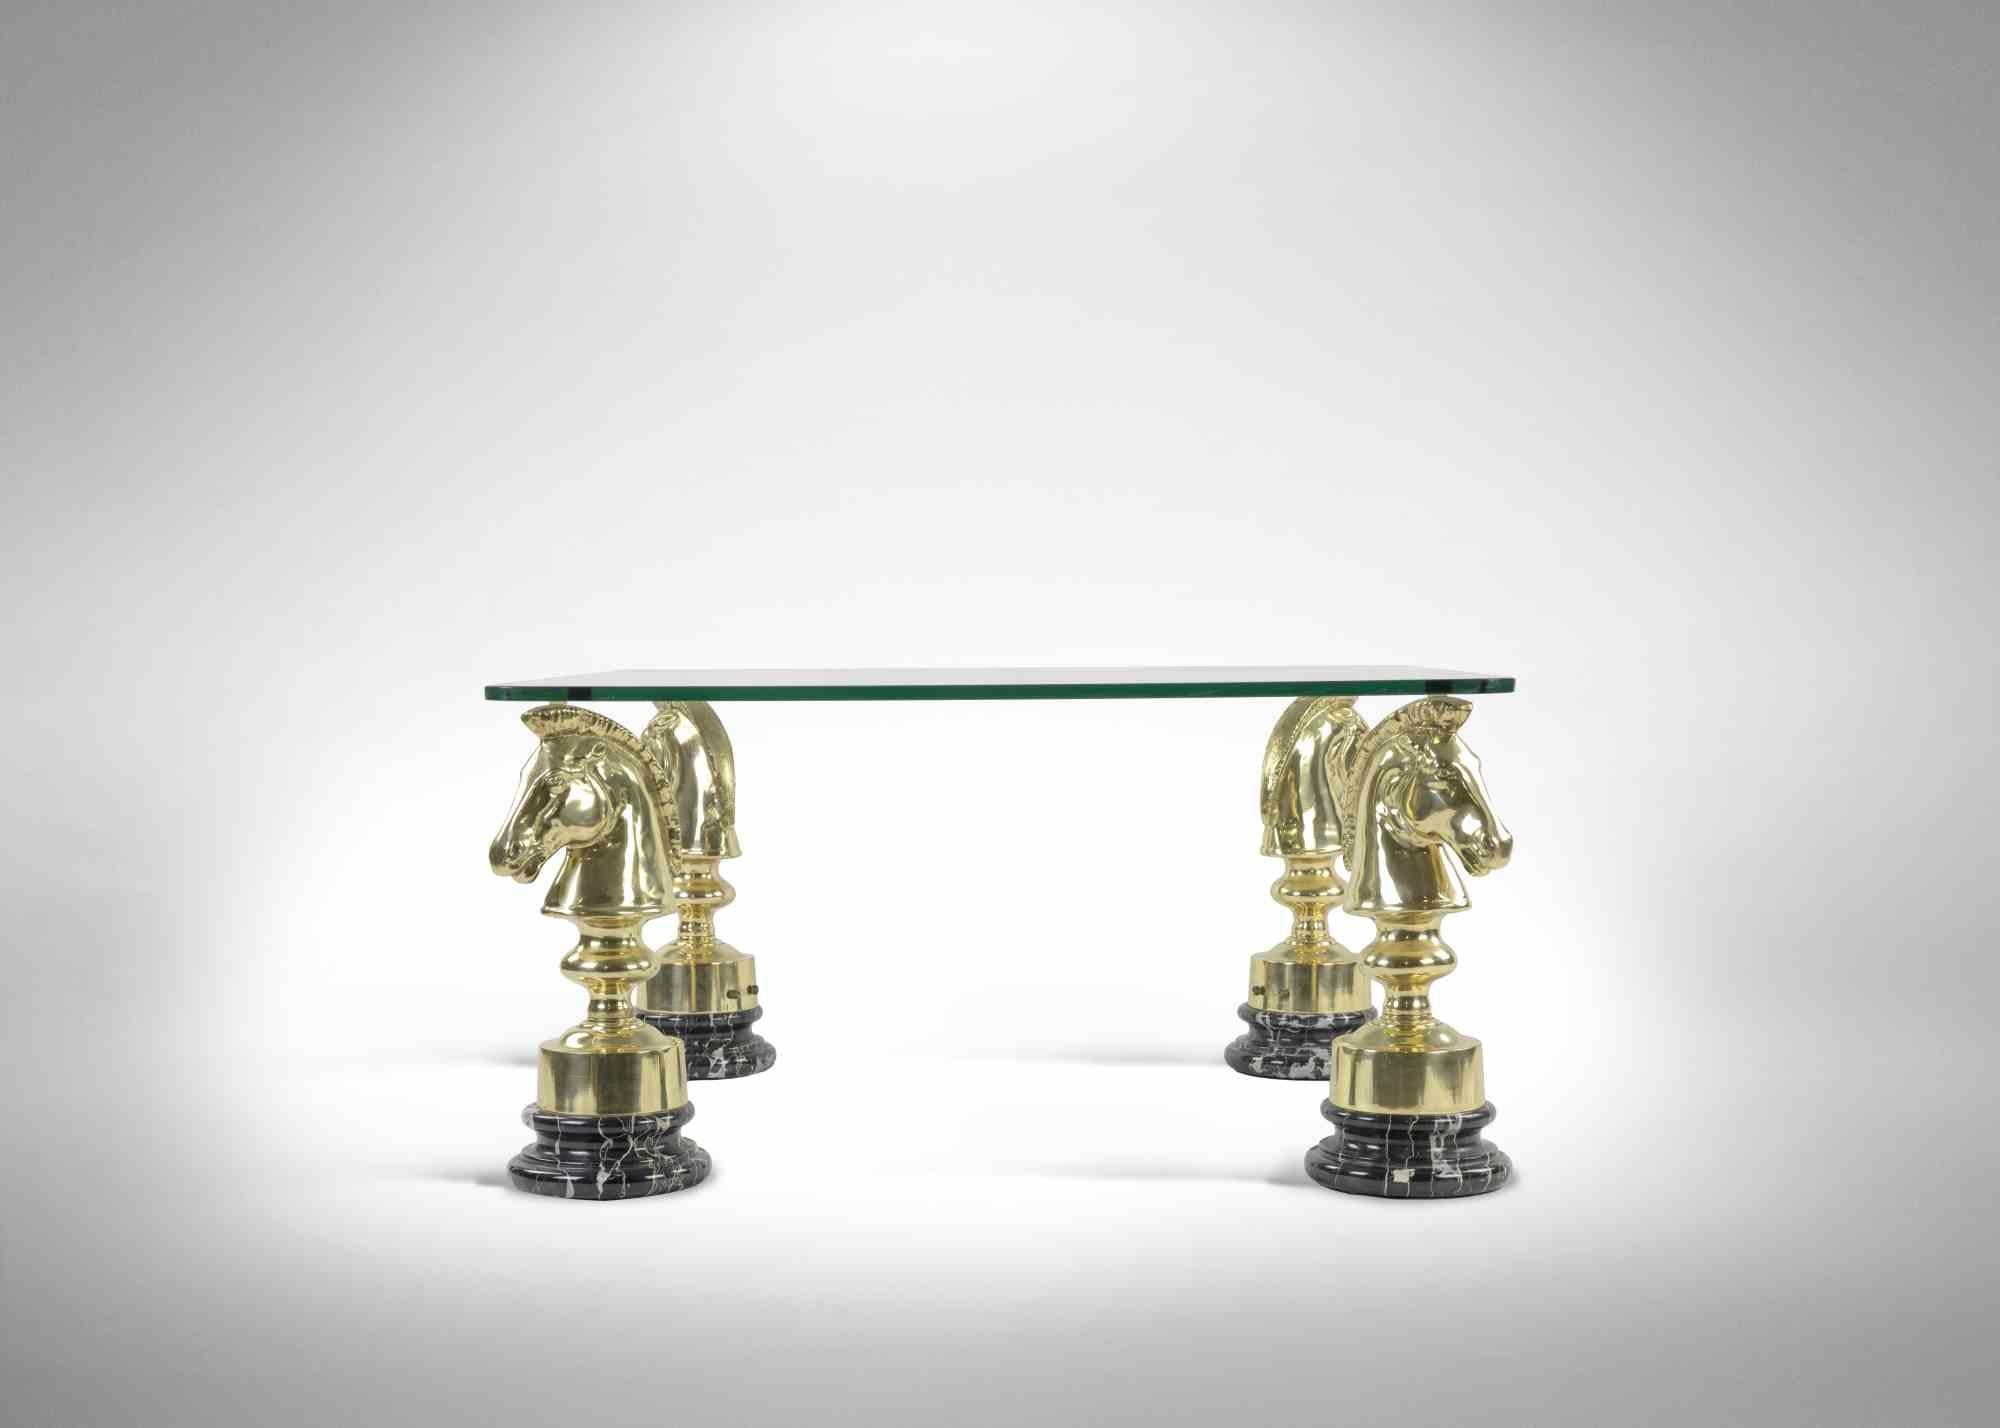 Coffee table with chess horse and marble bases.

Brass, Metal, marble.

Made in Italy, around 1980.

40 x 110 x 60 cm. 

Excellent conditions!